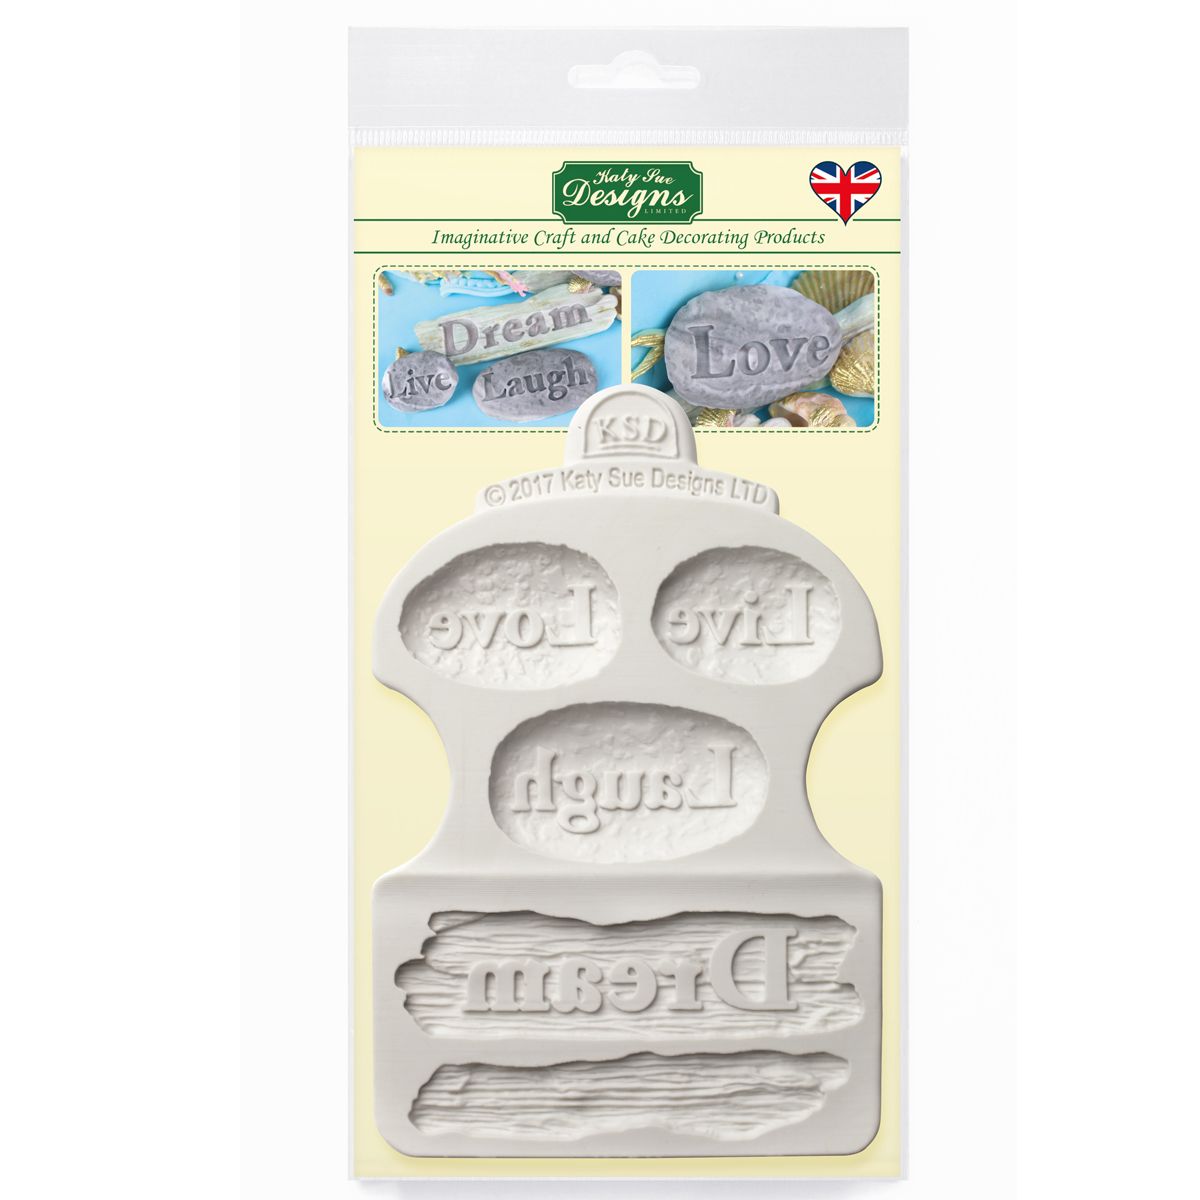 Forma Mould Driftwood a Word Stones CE0071, Katy Sue